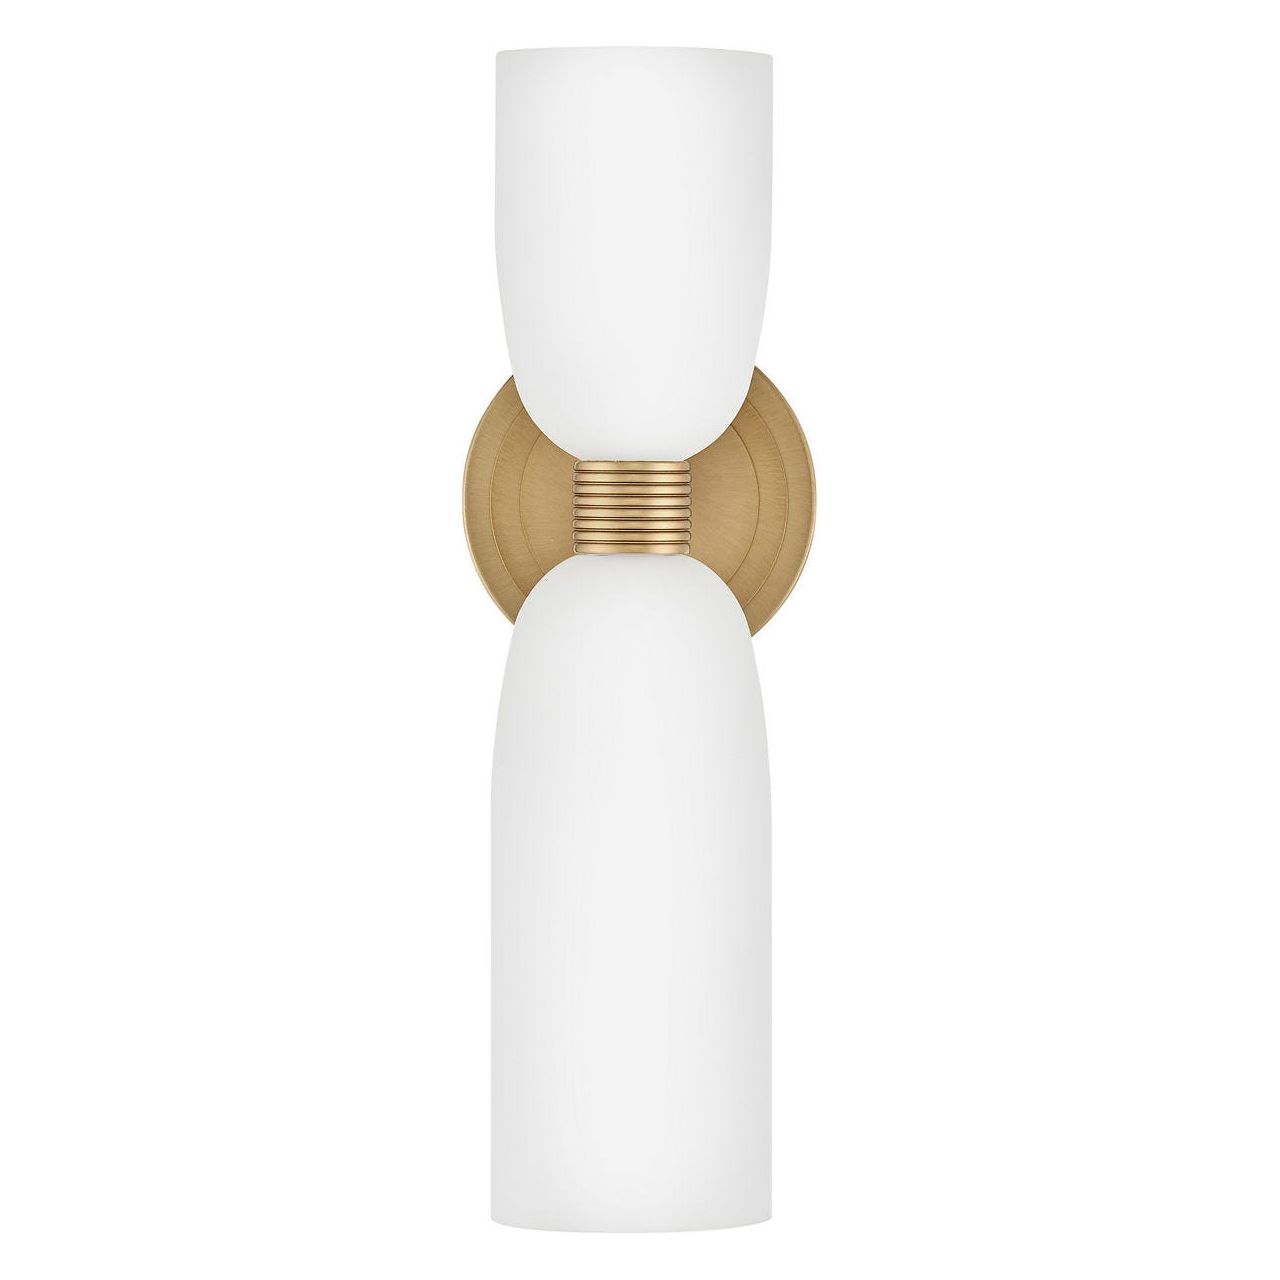 Hinkley Canada - 52960LCB-LL - LED Wall Sconce - Tallulah - Lacquered Brass